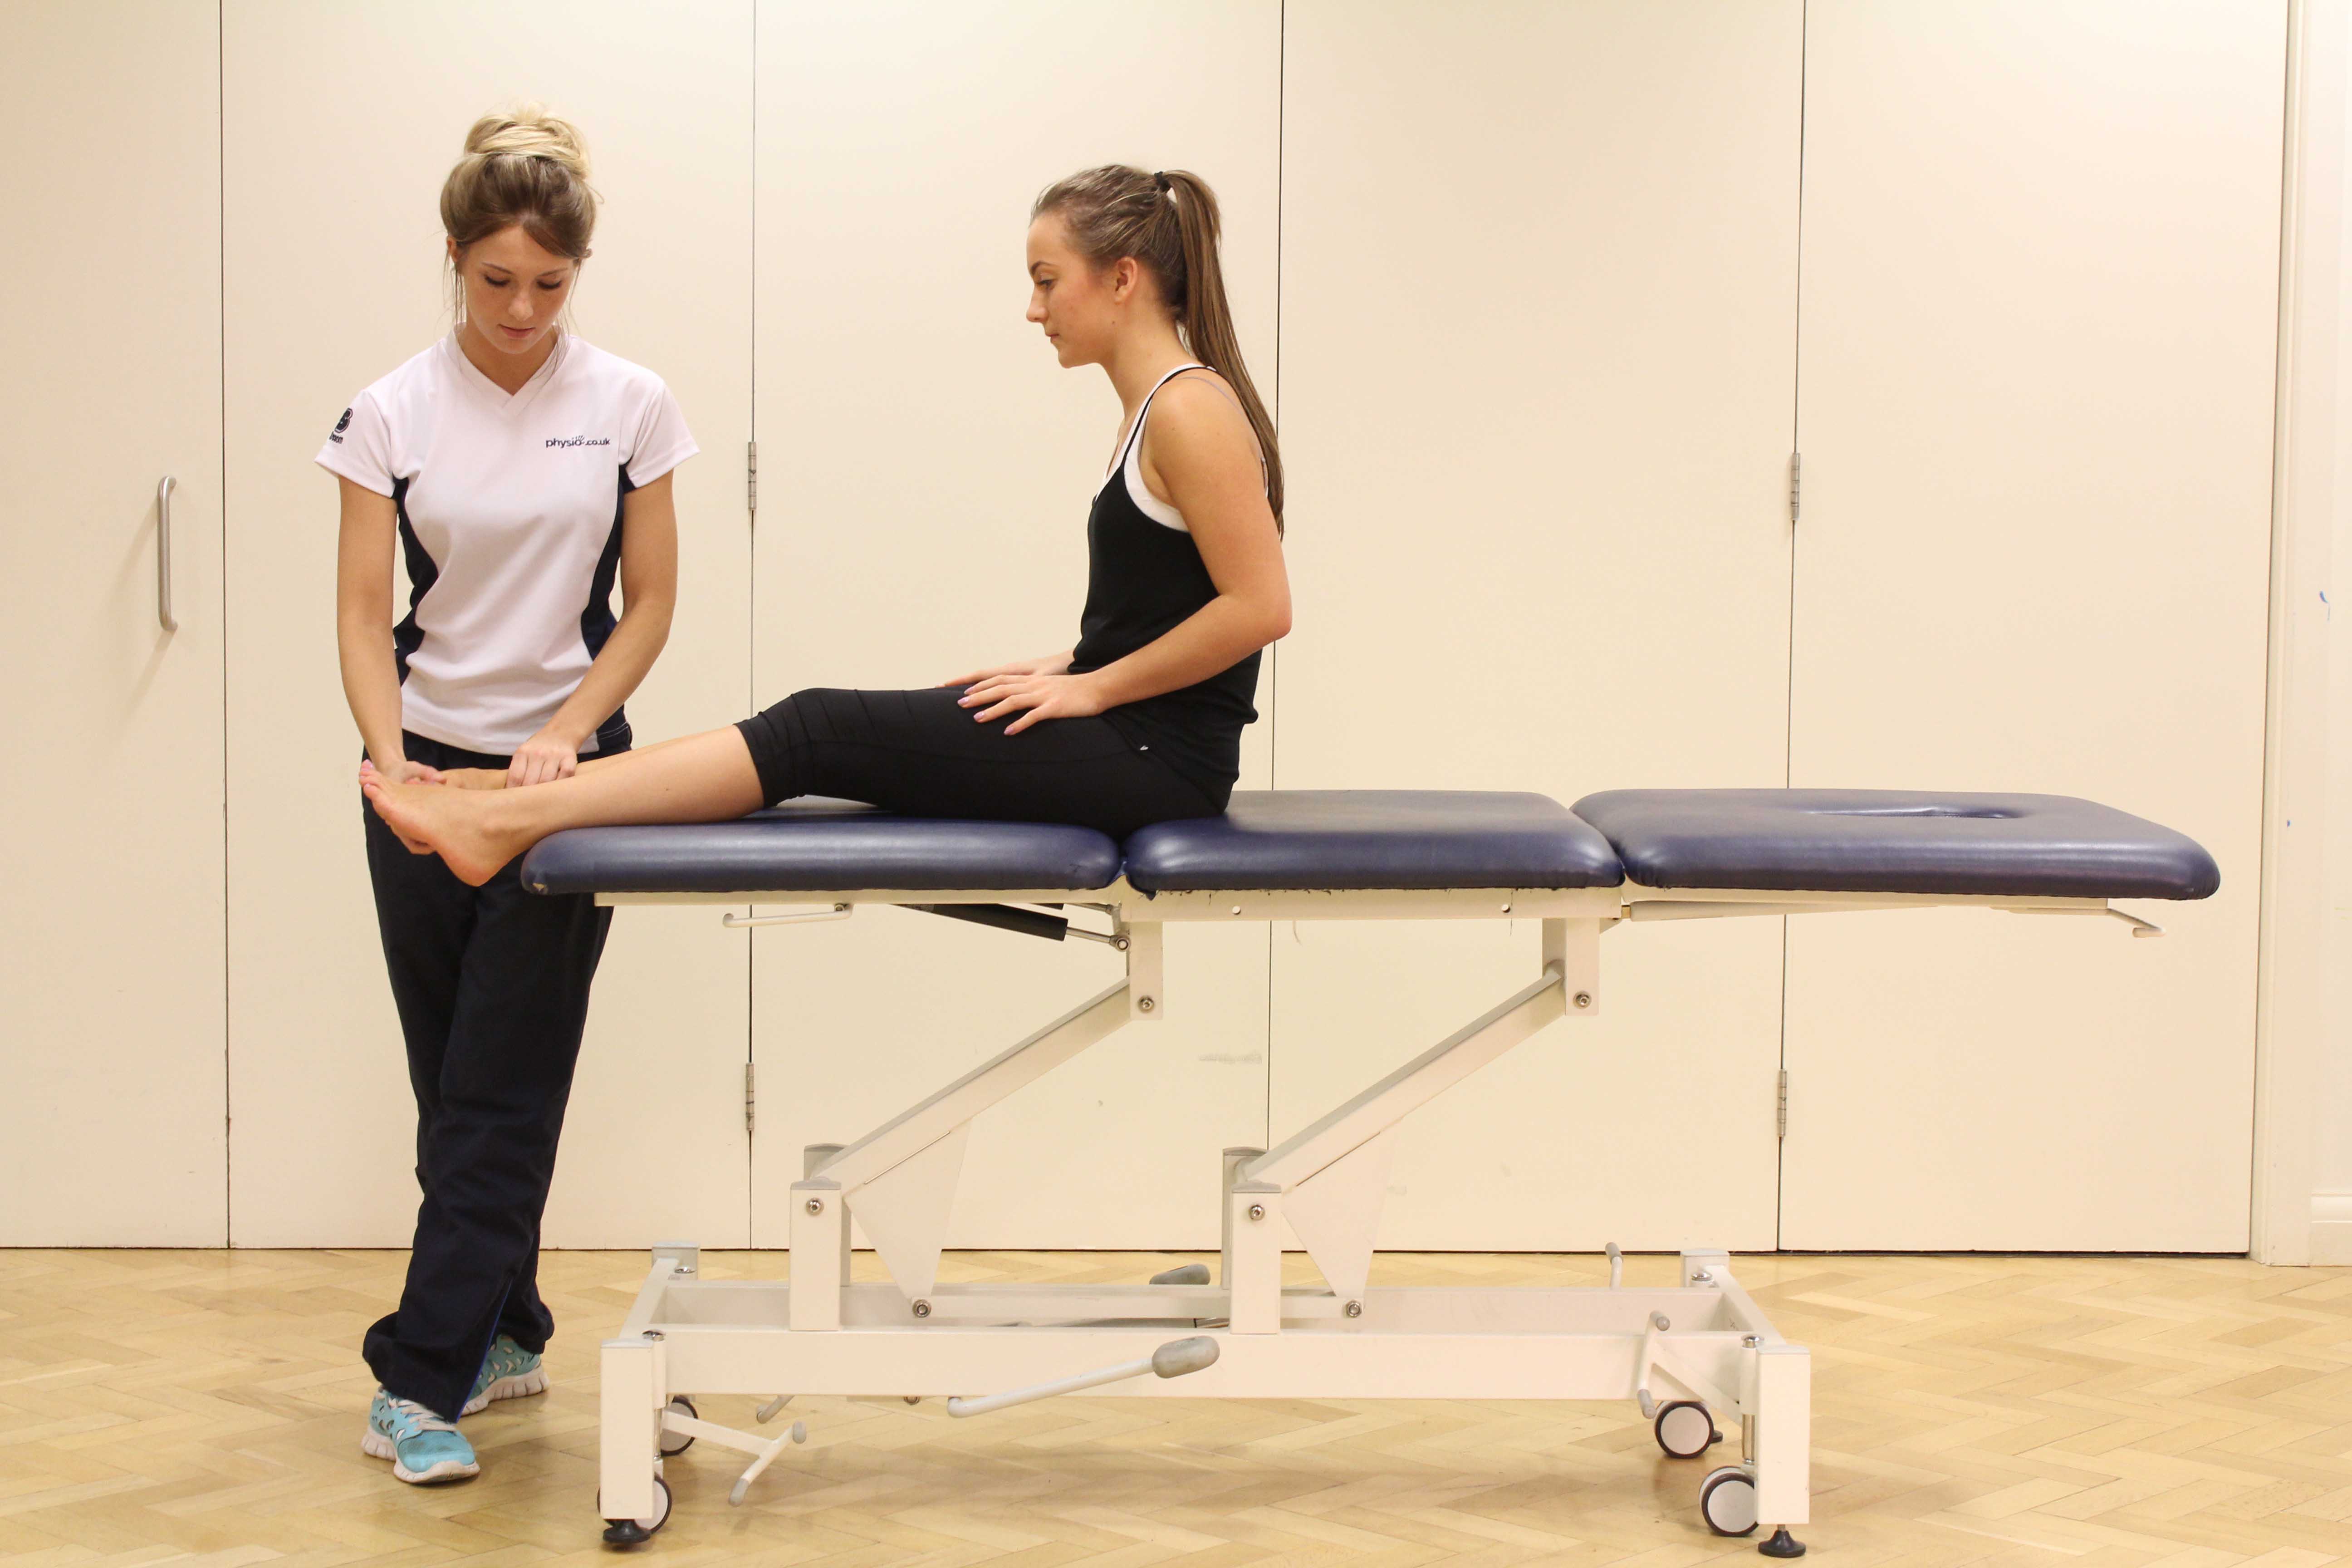 Mobilisations and stretches applied to the connective tissues in the ankle